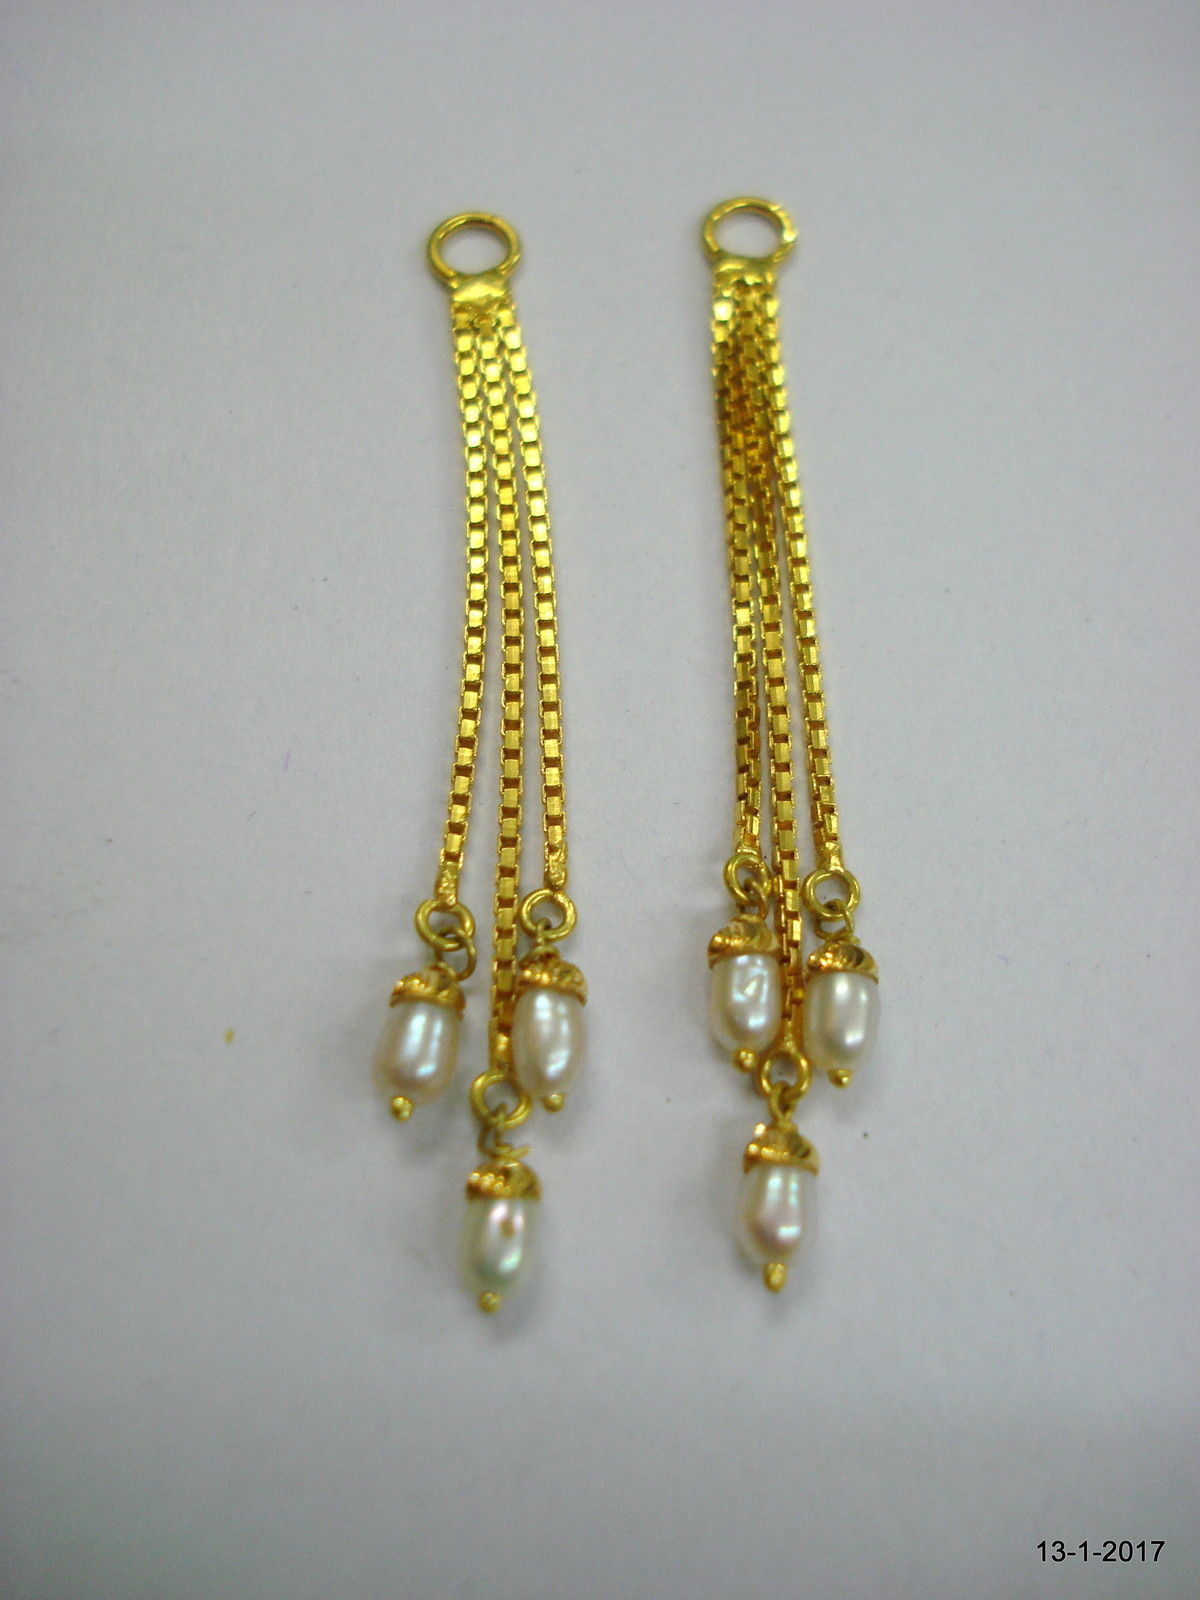 traditional design 20kt gold chain for ear stud earrings handmade jewelry - $335.61